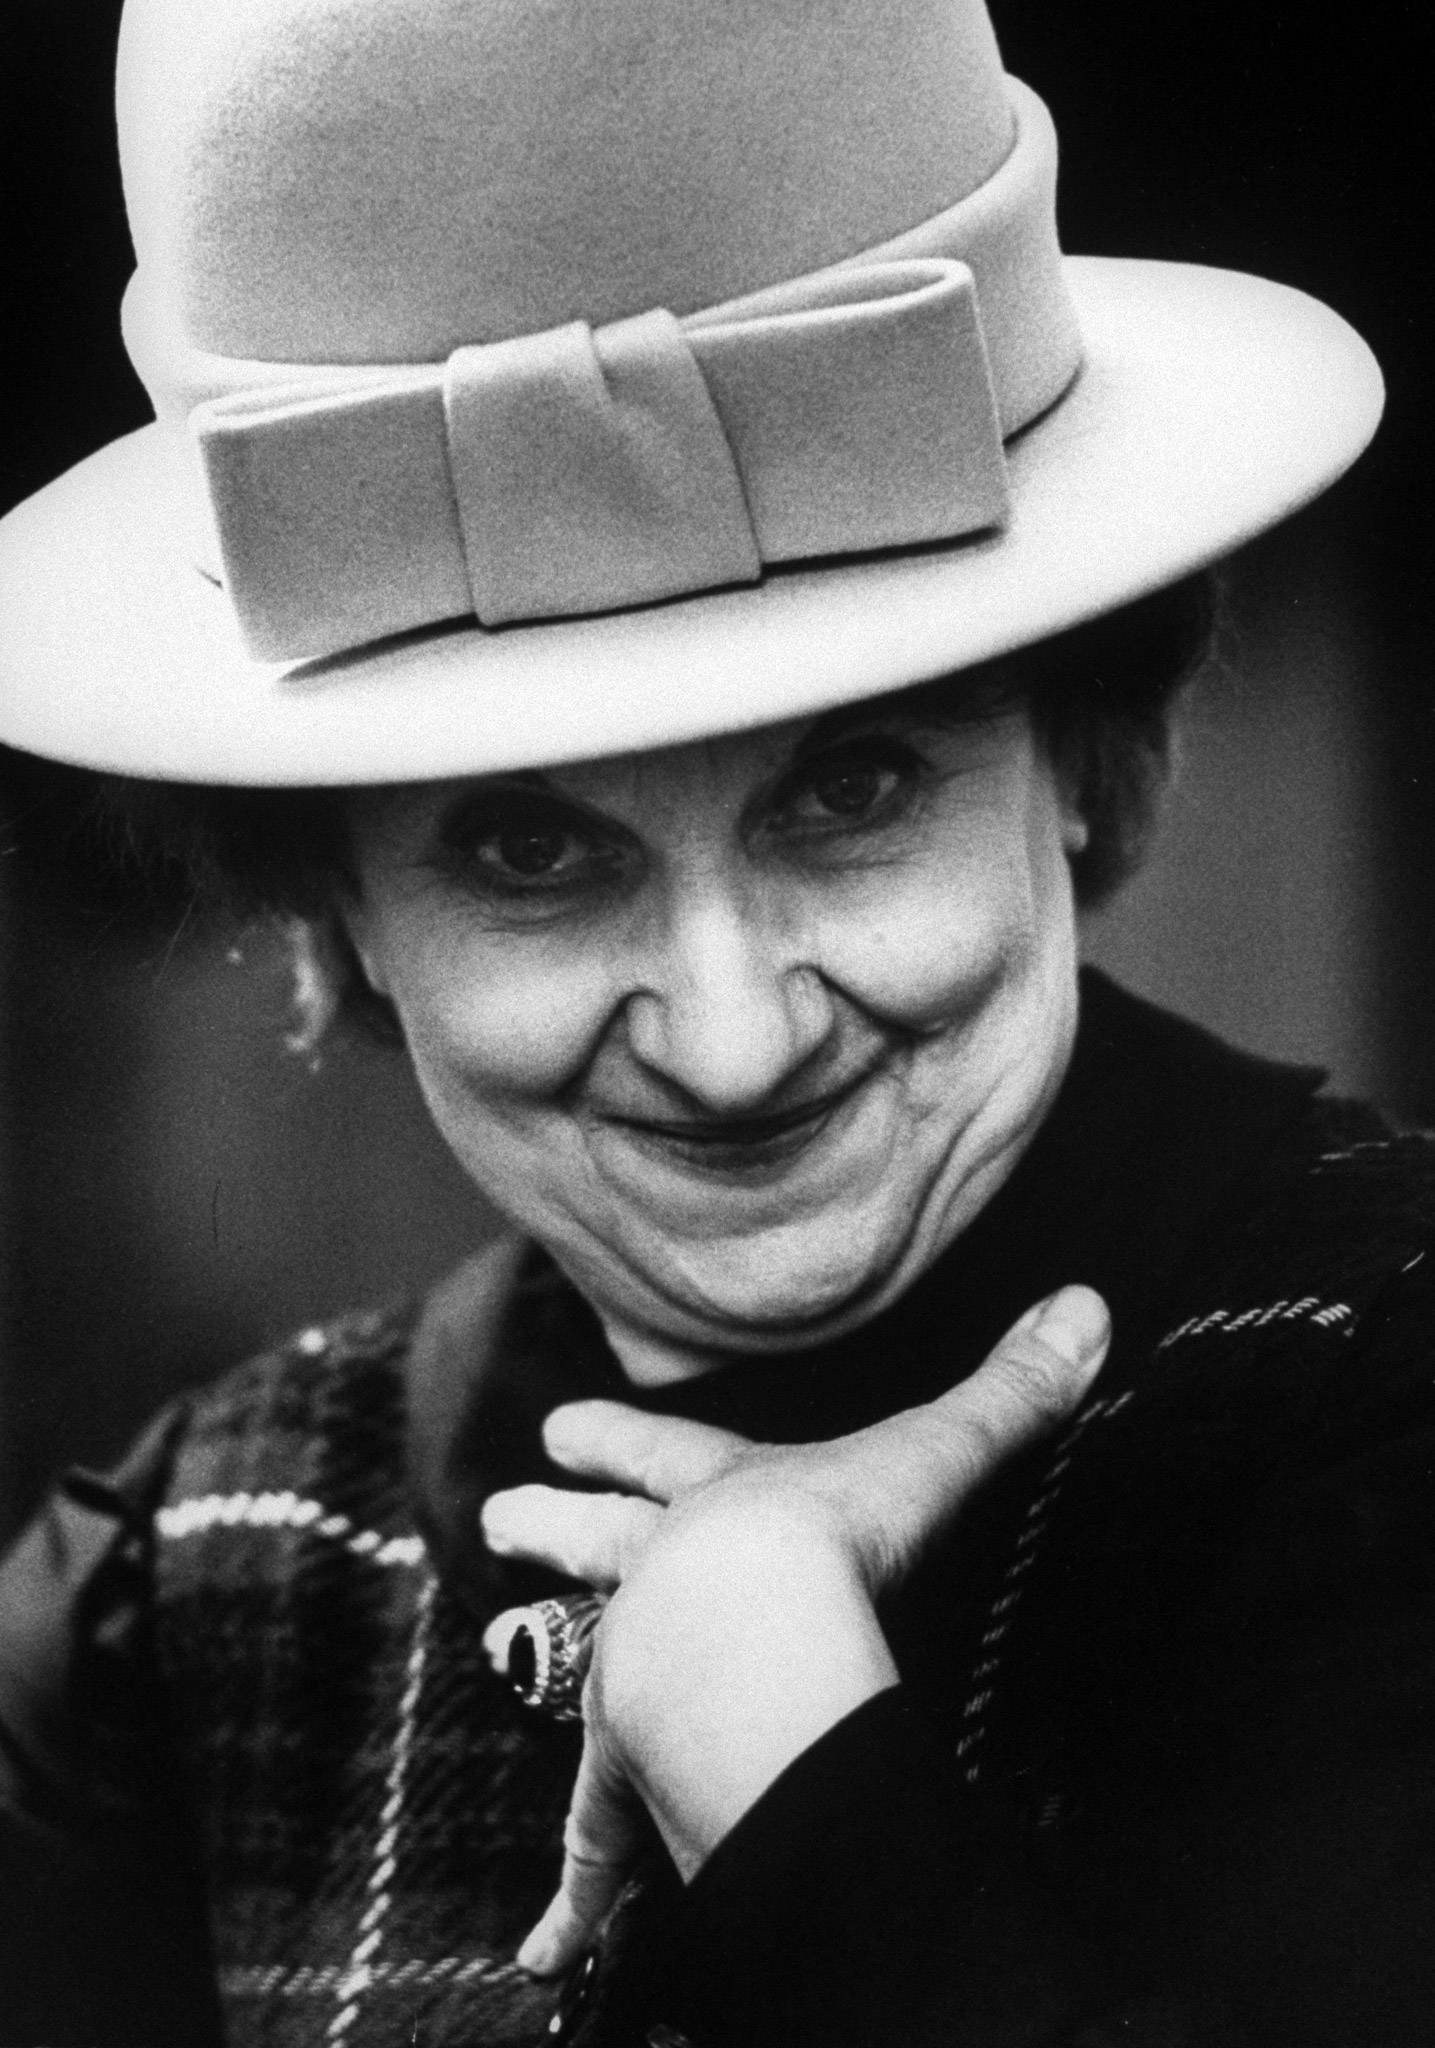 English comedienne Hermione Gingold modeling a derby-style hat. 1963.